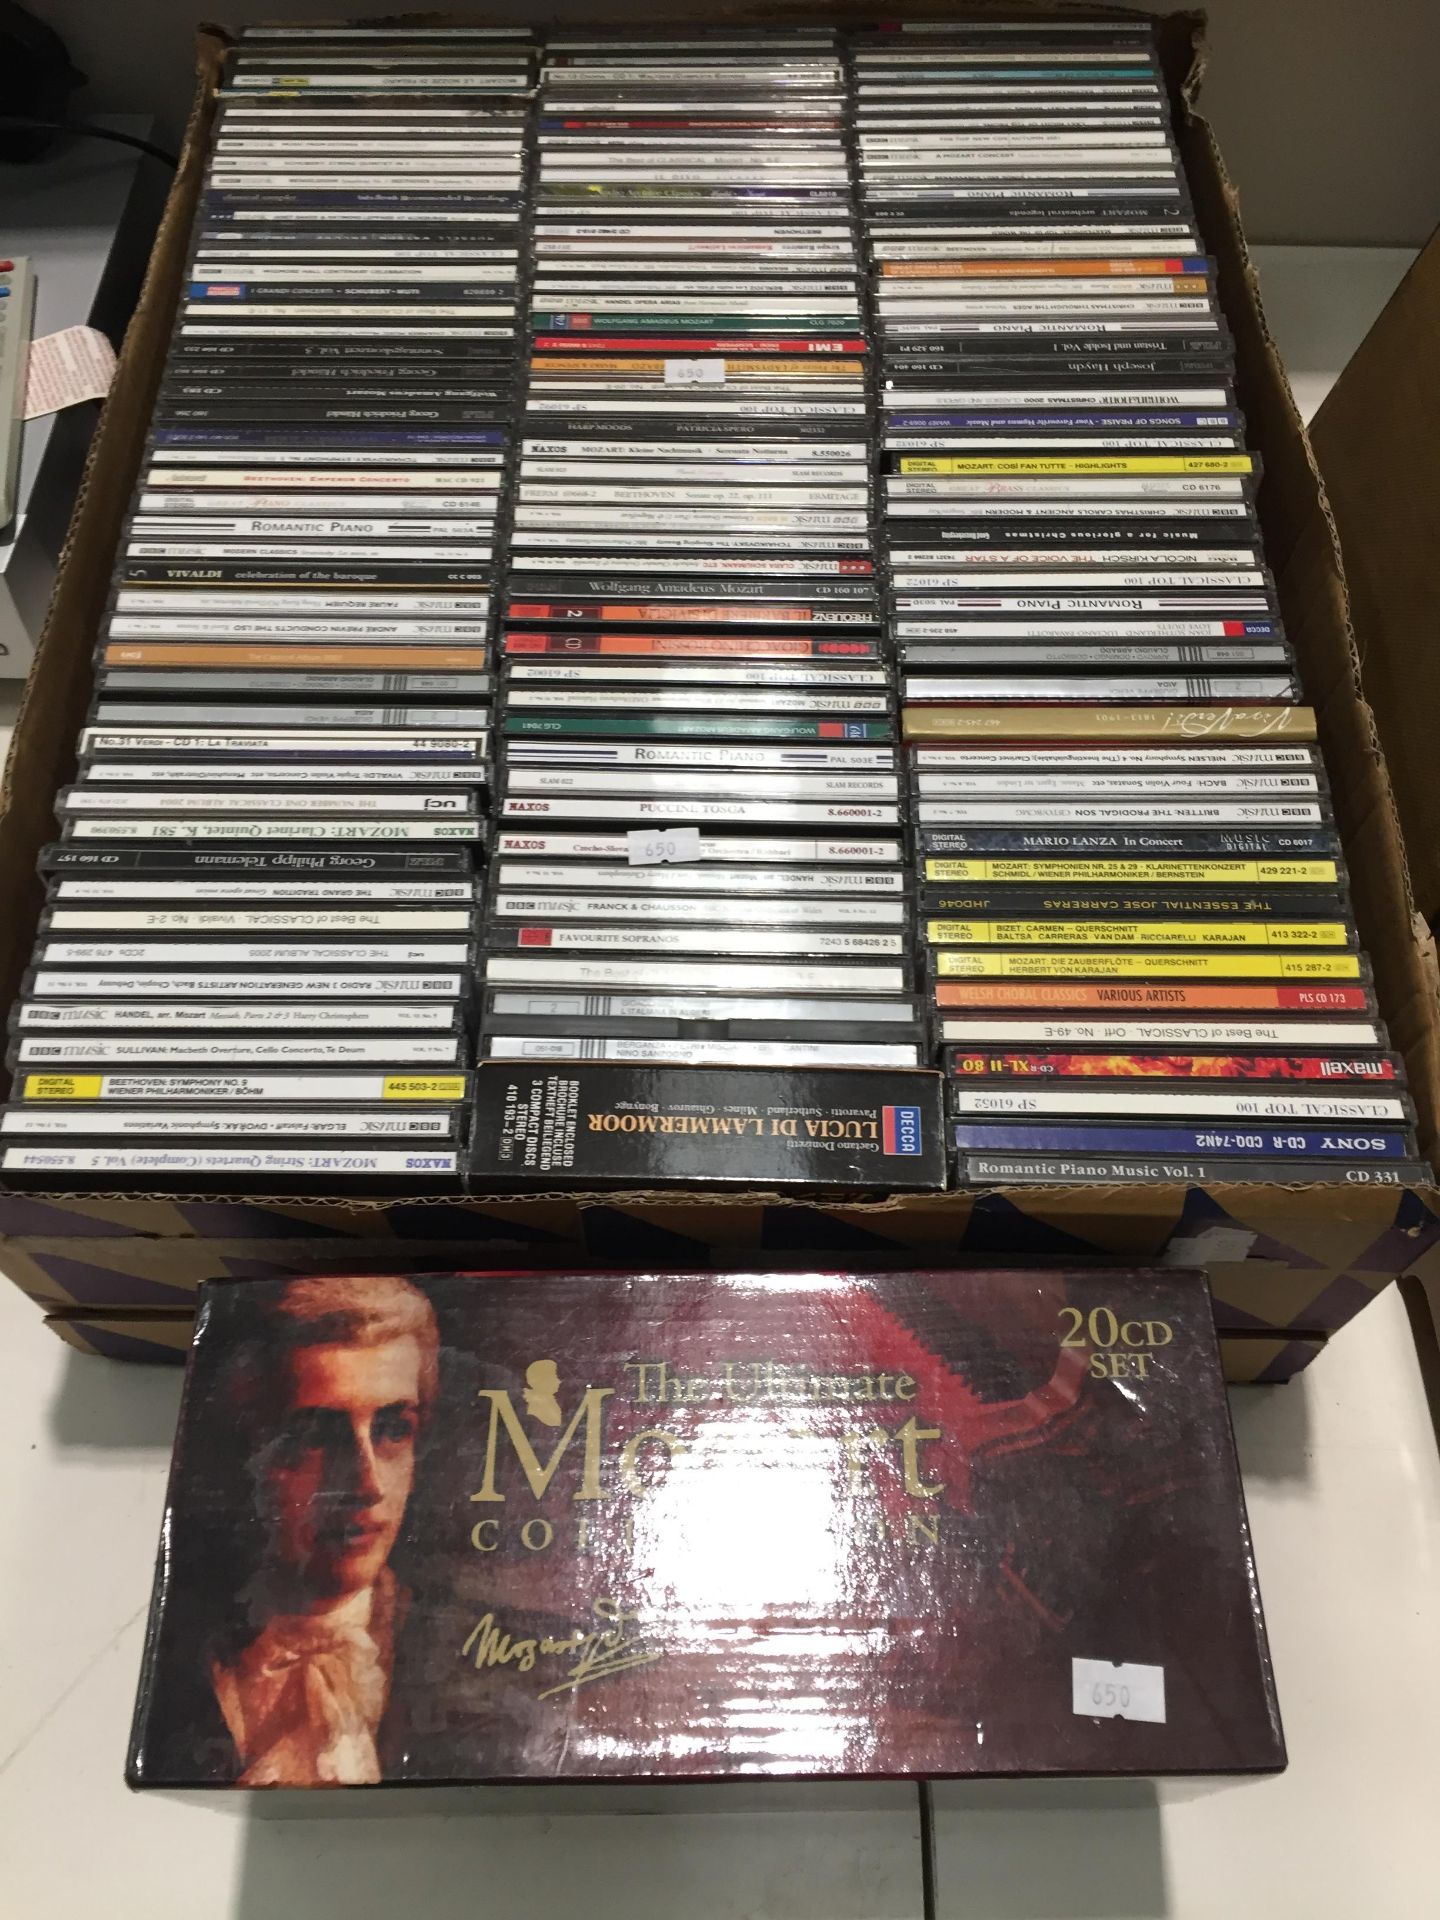 150+ Classical CDs including 20 CD Ultimate Mozart Collection